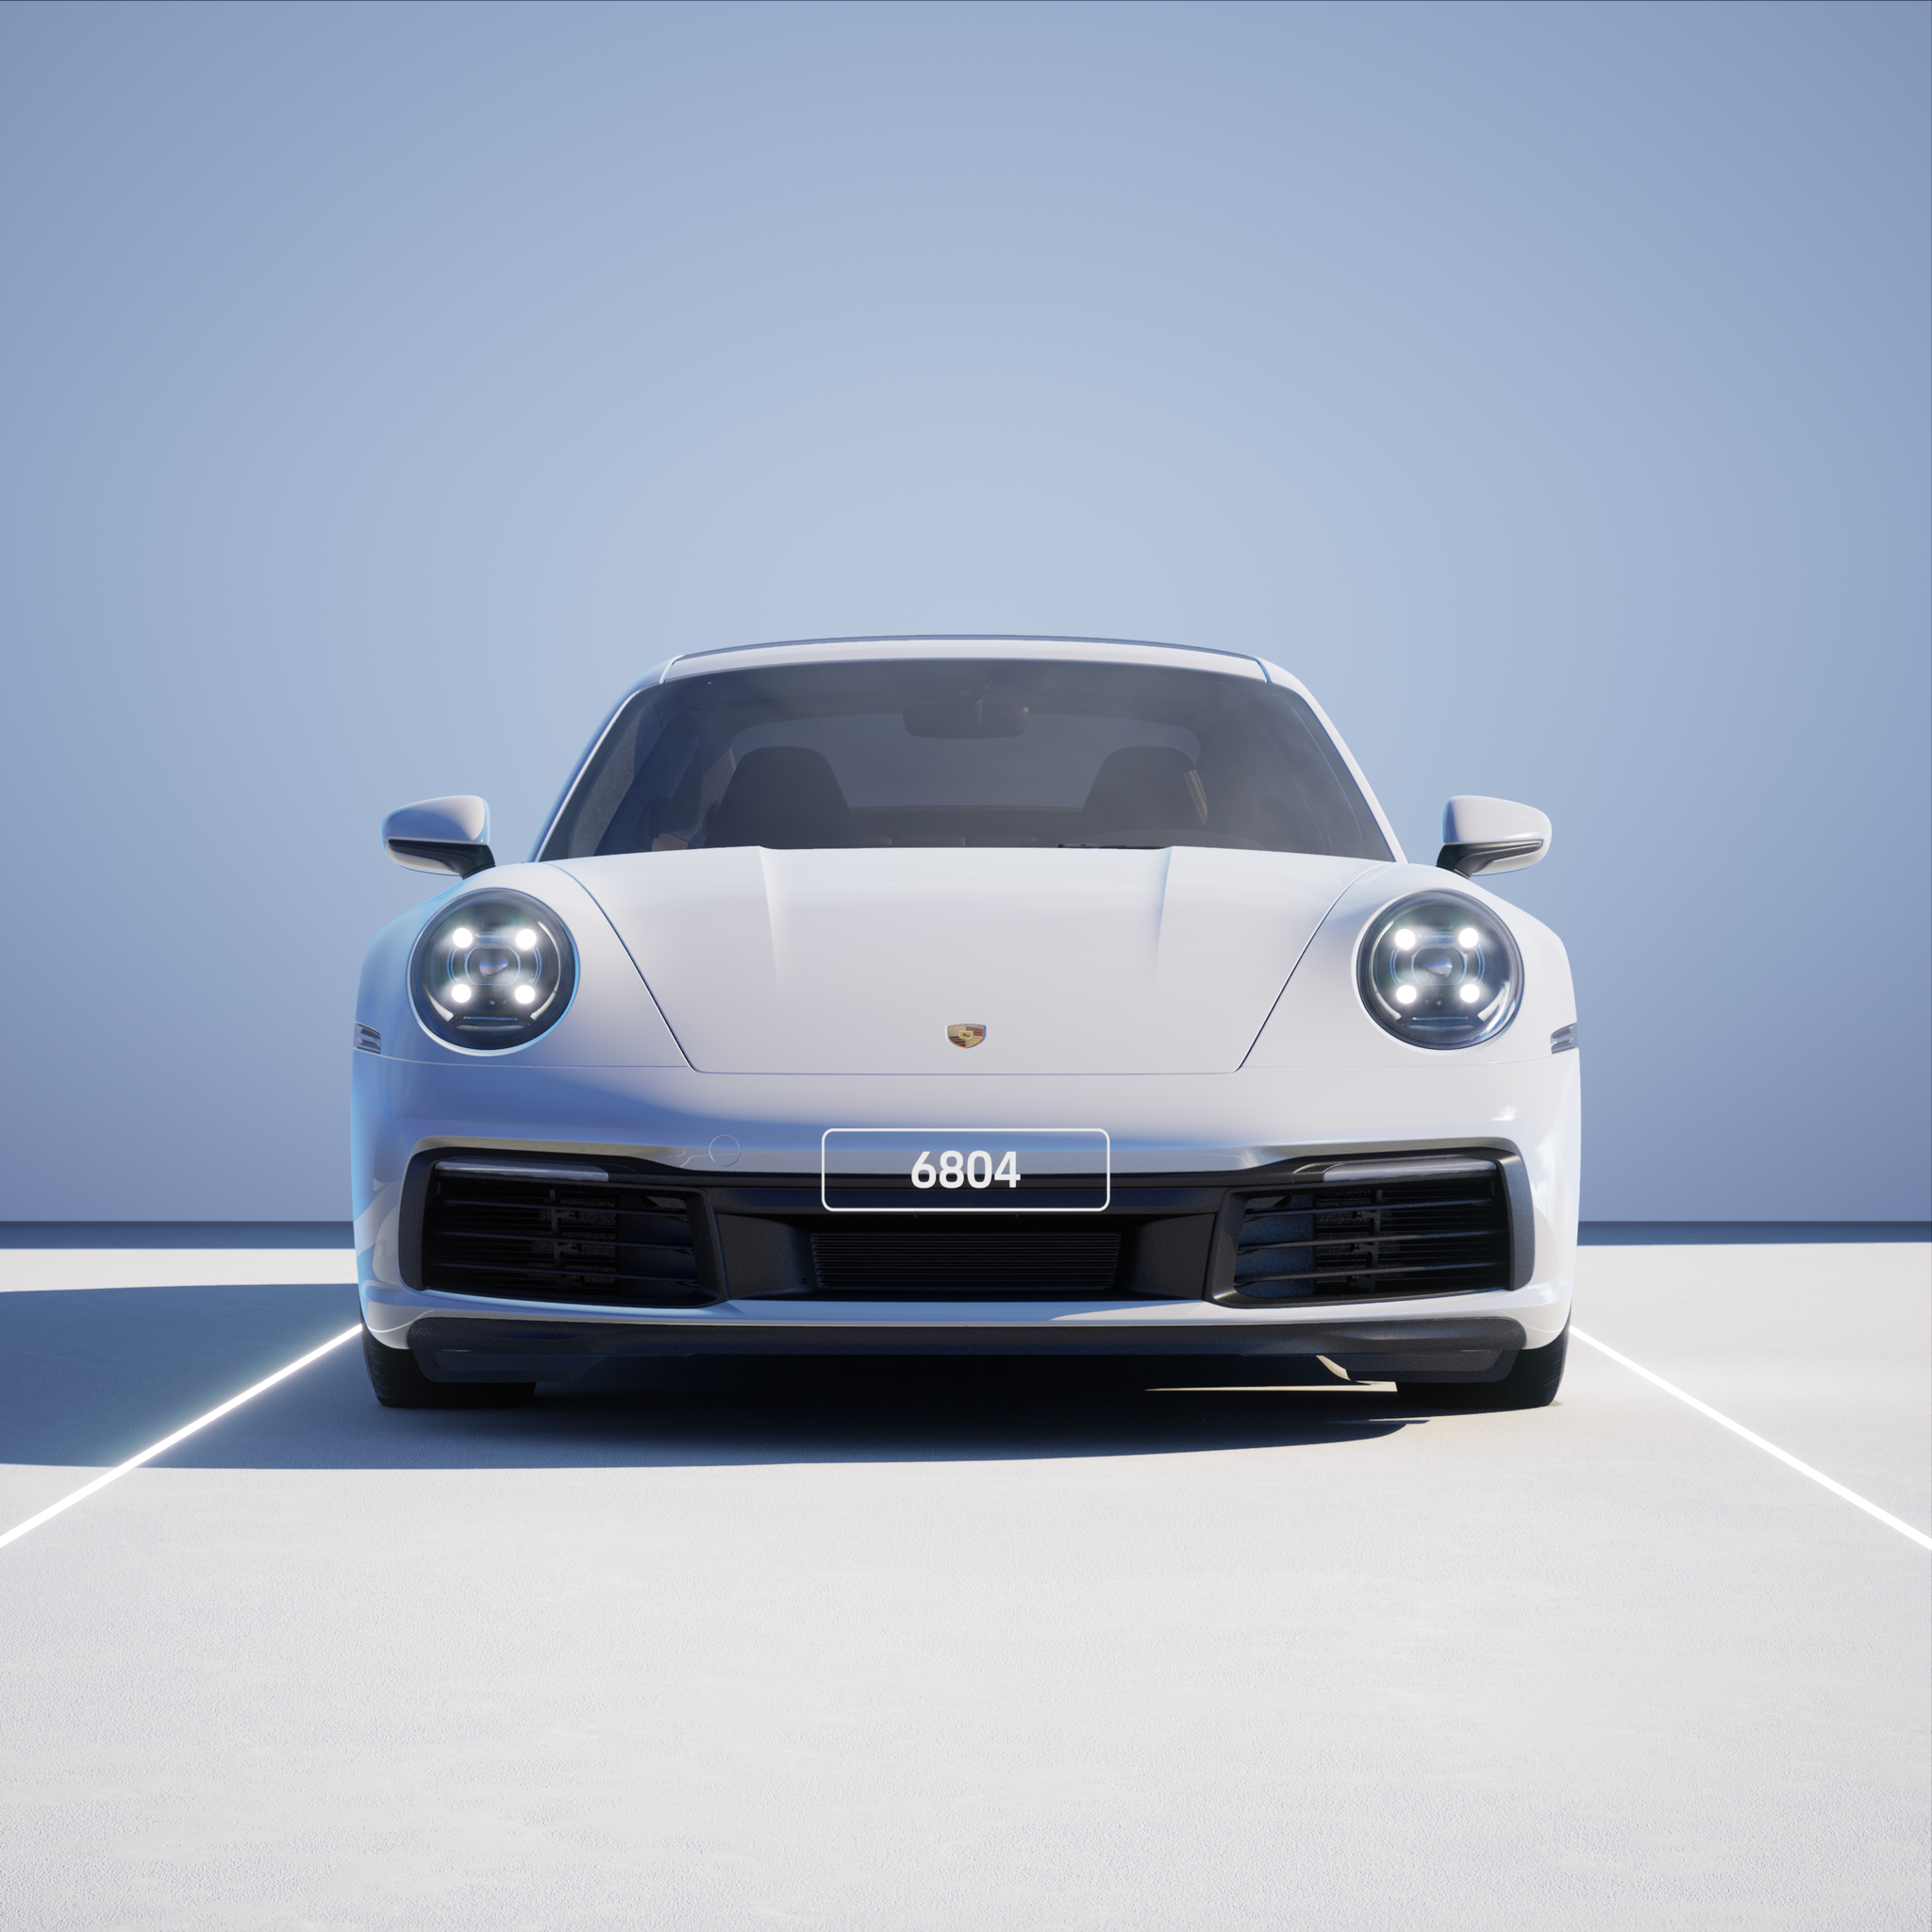 The PORSCHΞ 911 6804 image in phase